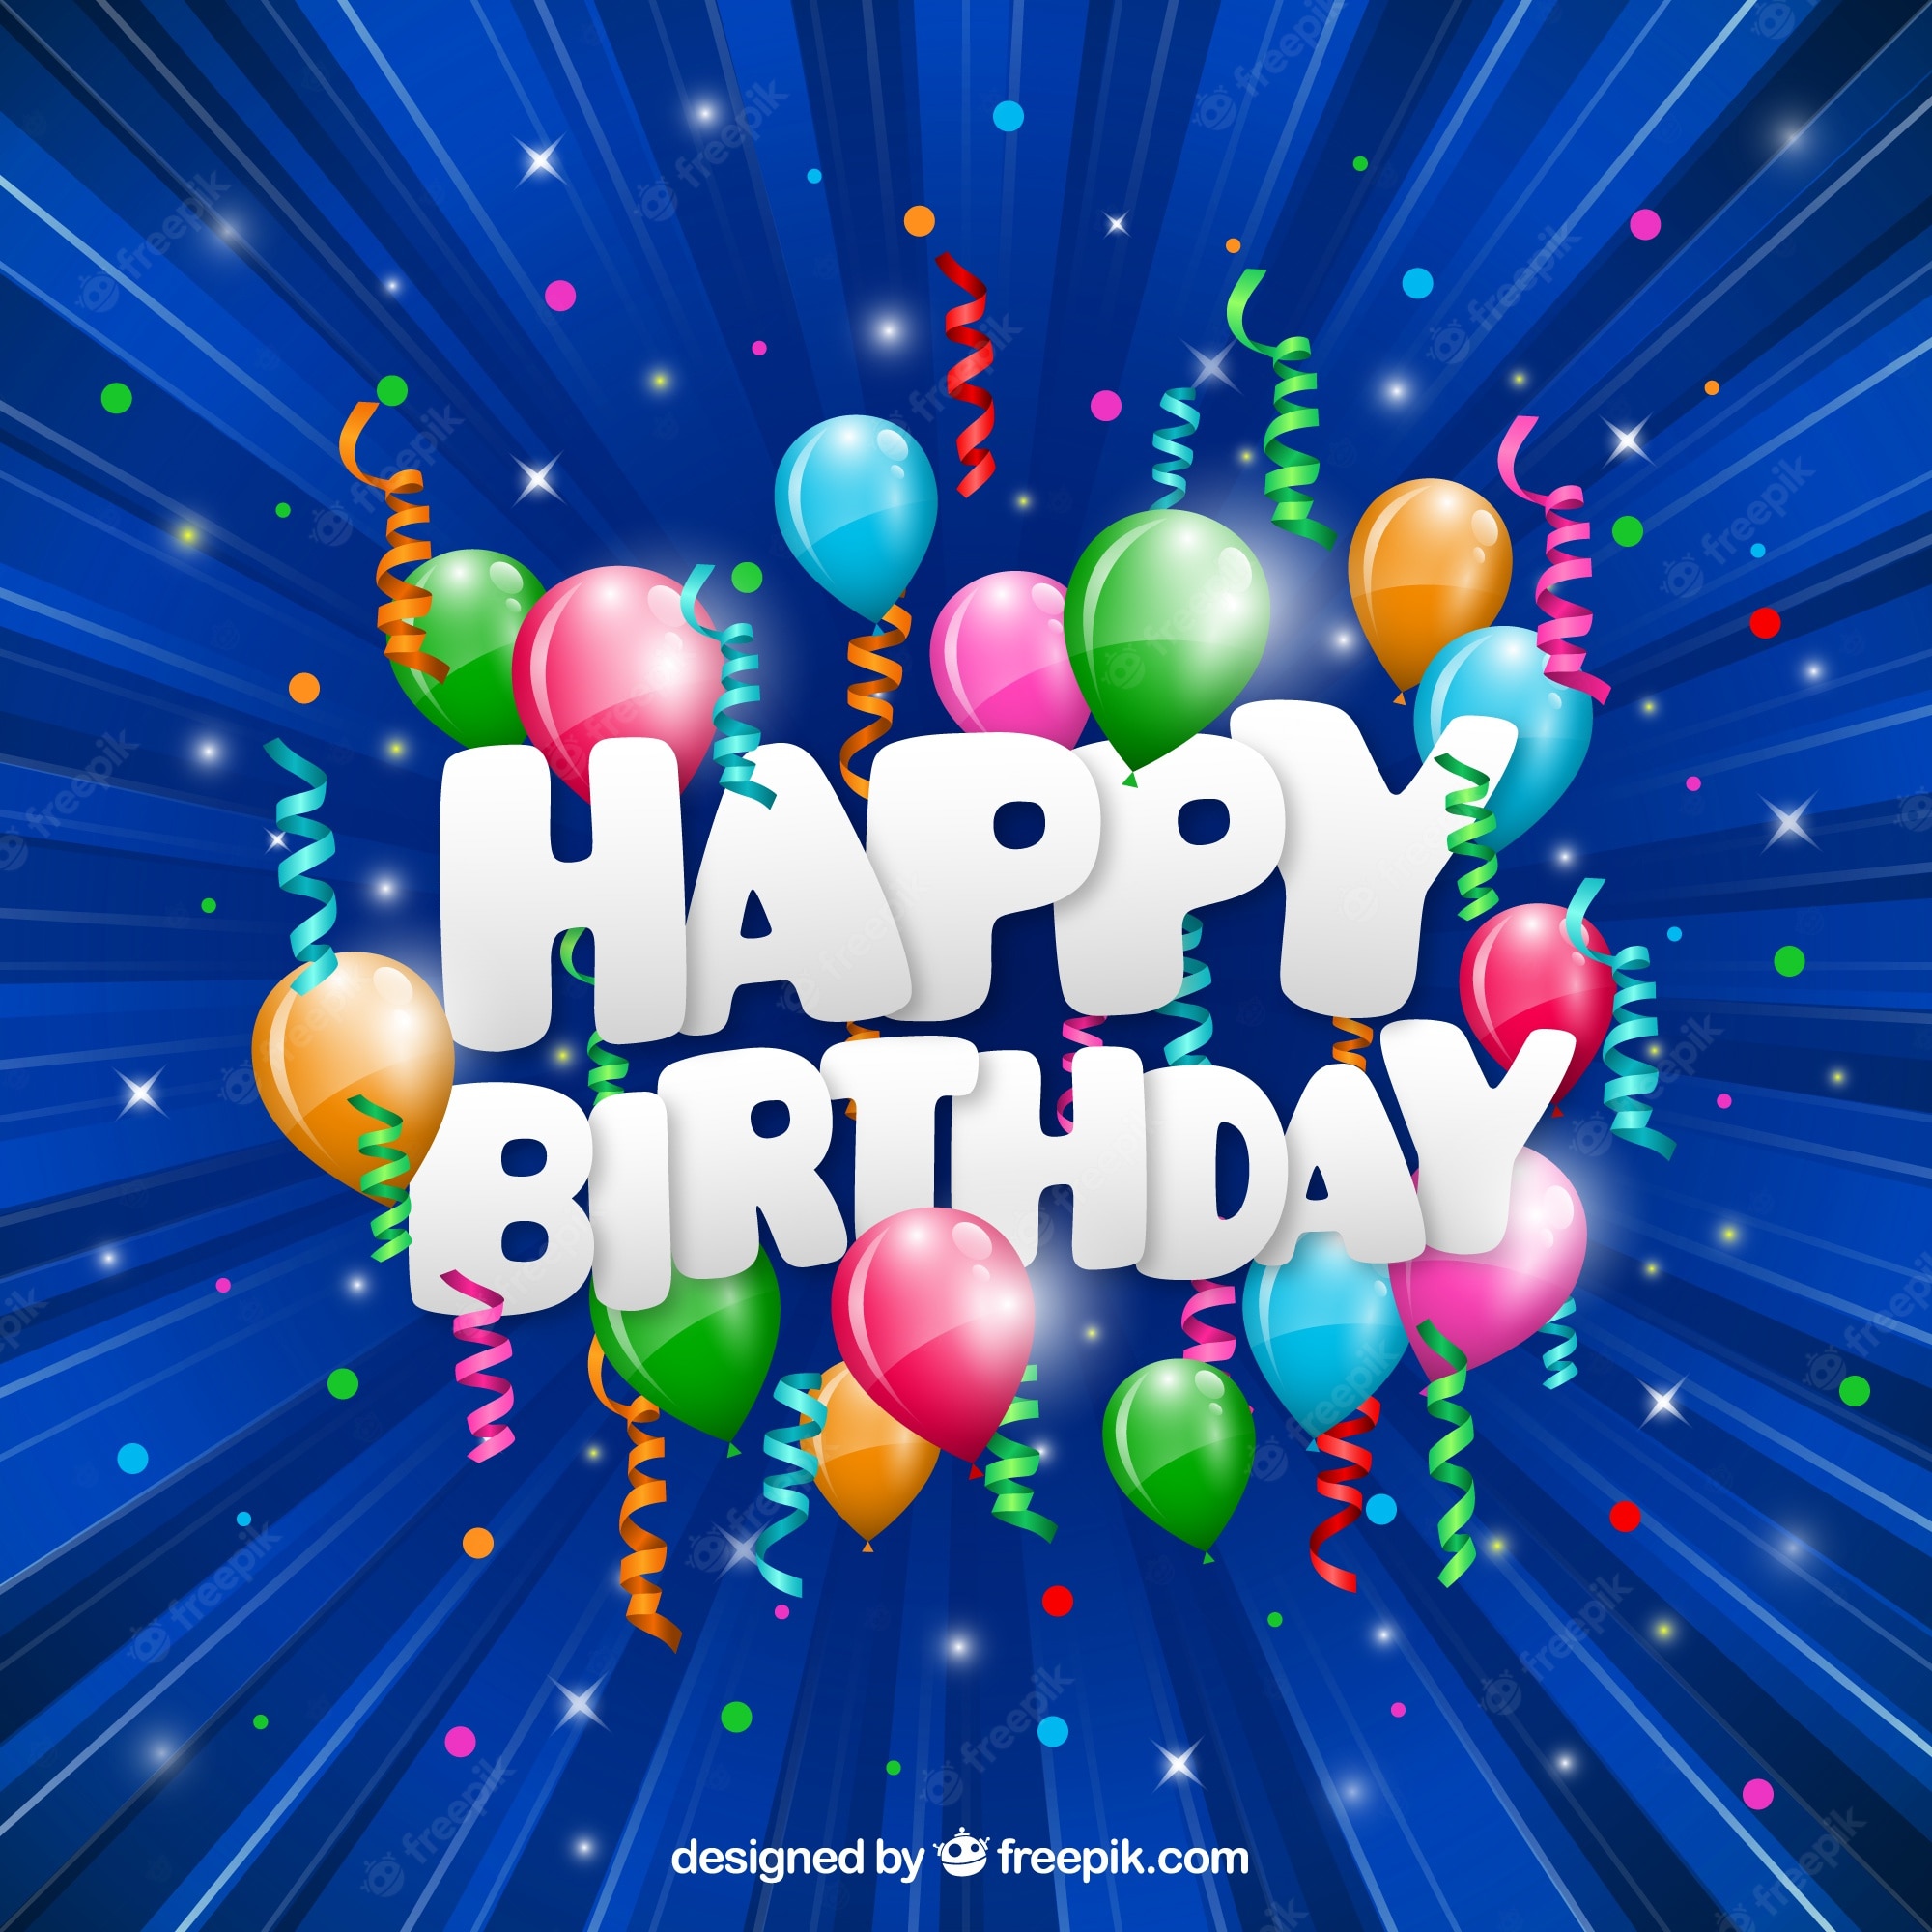 Happy birthday images for free download